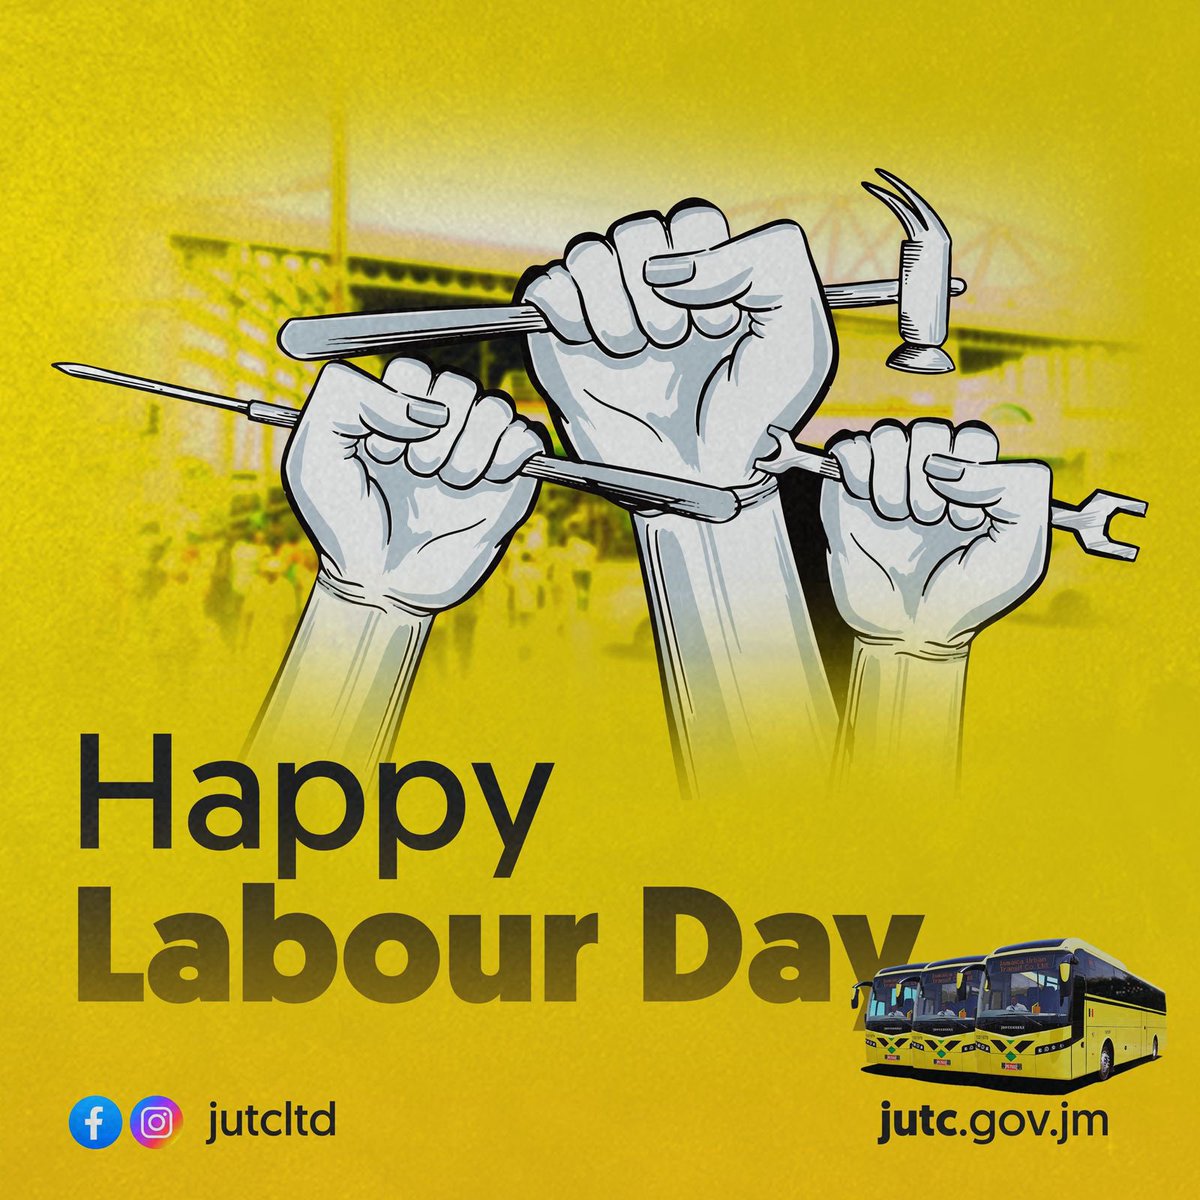 Happy Labour Day, everyone! 🎉 Today, we honor the tireless efforts of workers worldwide. Your dedication drives progress and shapes our communities. Here's to celebrating your hard work and achievements! 💪🌟 #LabourDay #WorkersDay #CelebrateWorkers